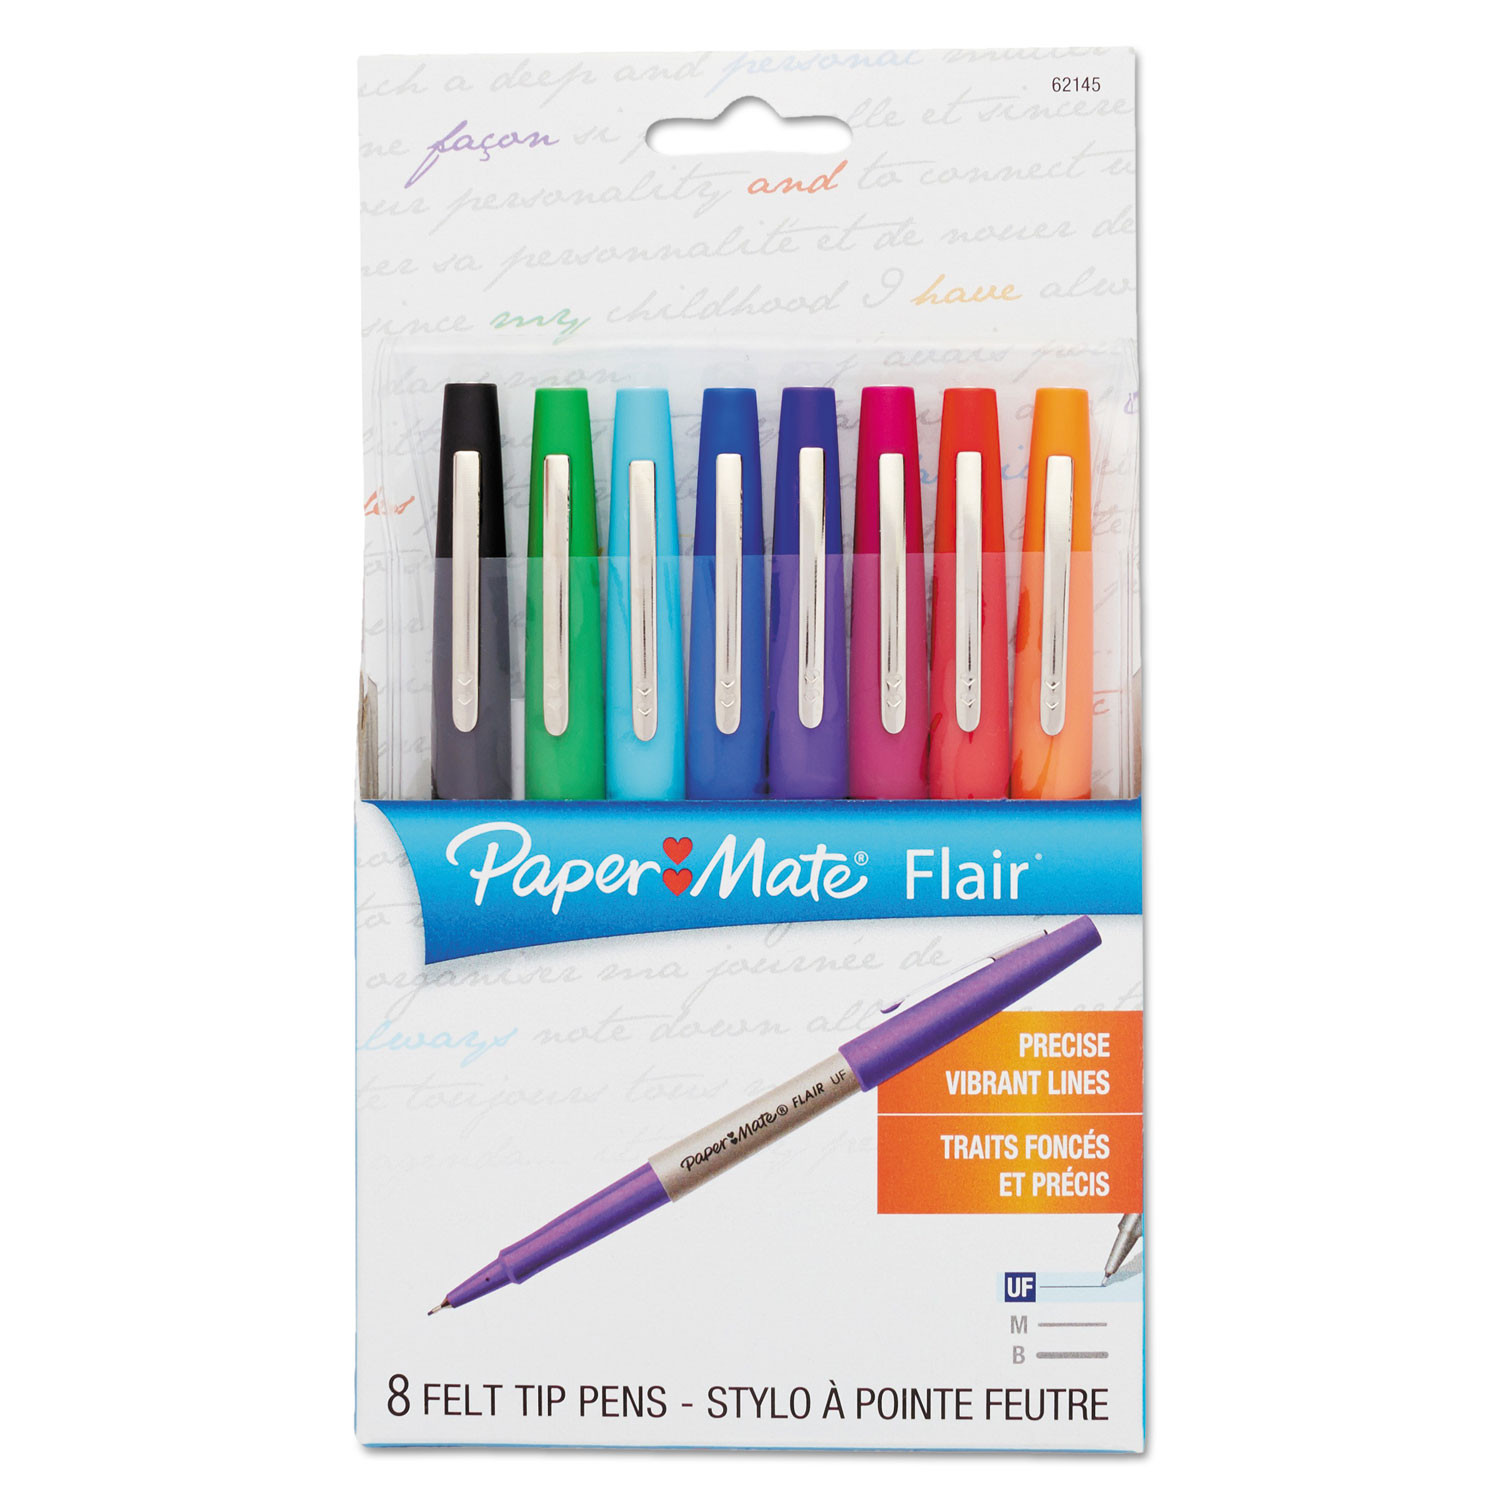 Paper mate Pack Of Makers Flair Tropical Vacation M 0.7 mm